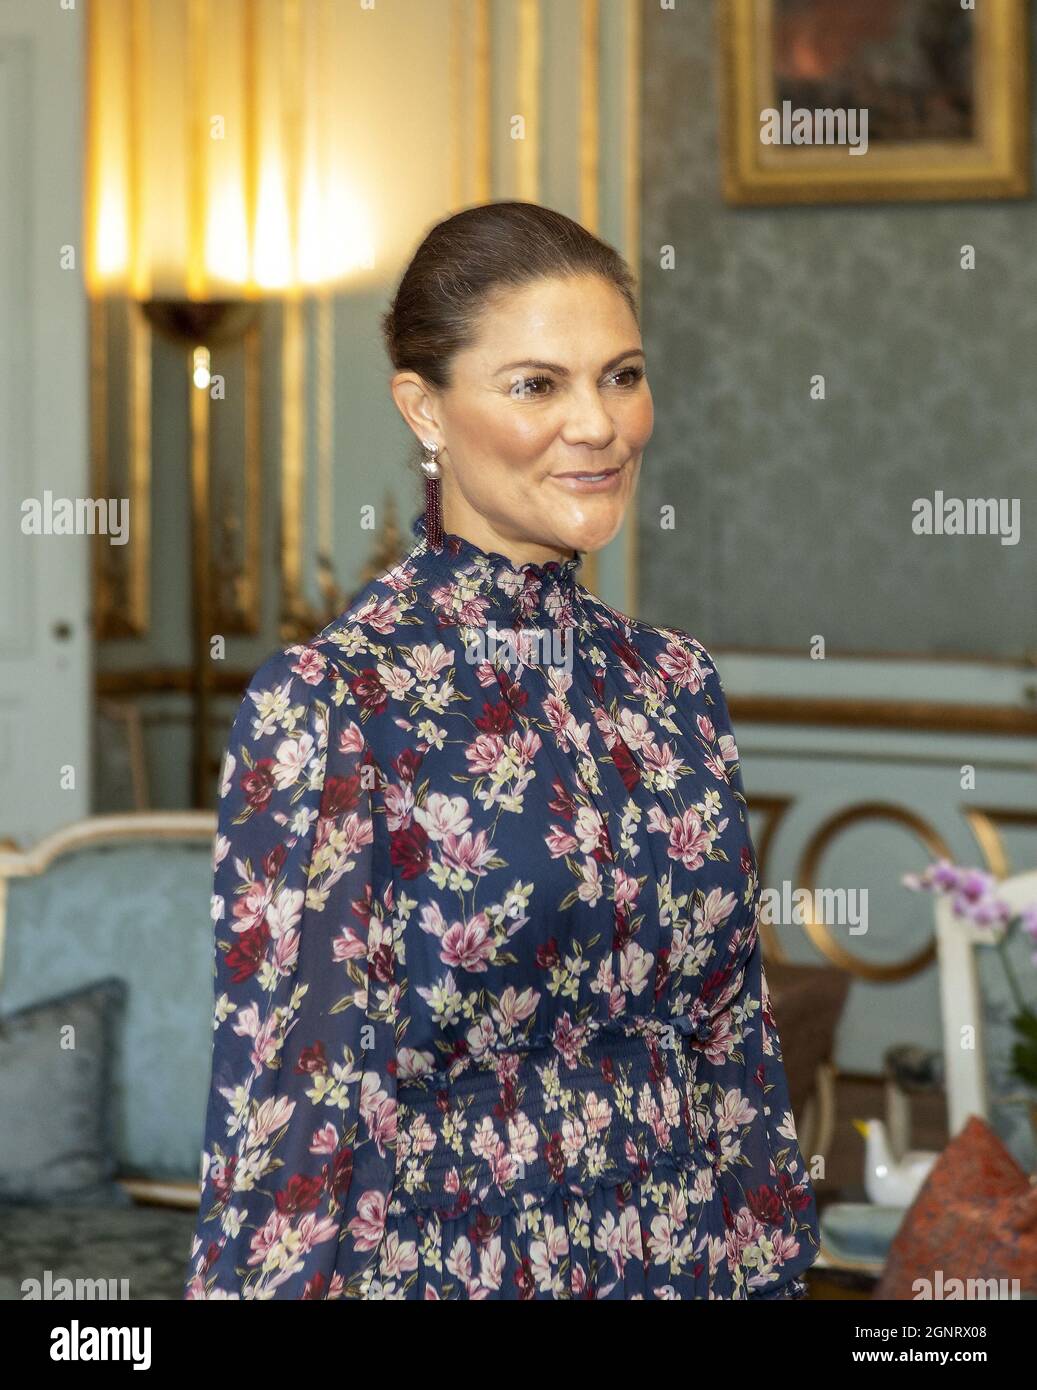 Crown Princess Victoria audience of Estonian President H.E. Kersti Kaljulaid in Stockholm, Sweden, on September 27, 2021. Photo by Peter Grännby/Stella Pictures/ABACAPRESS.COM Stock Photo